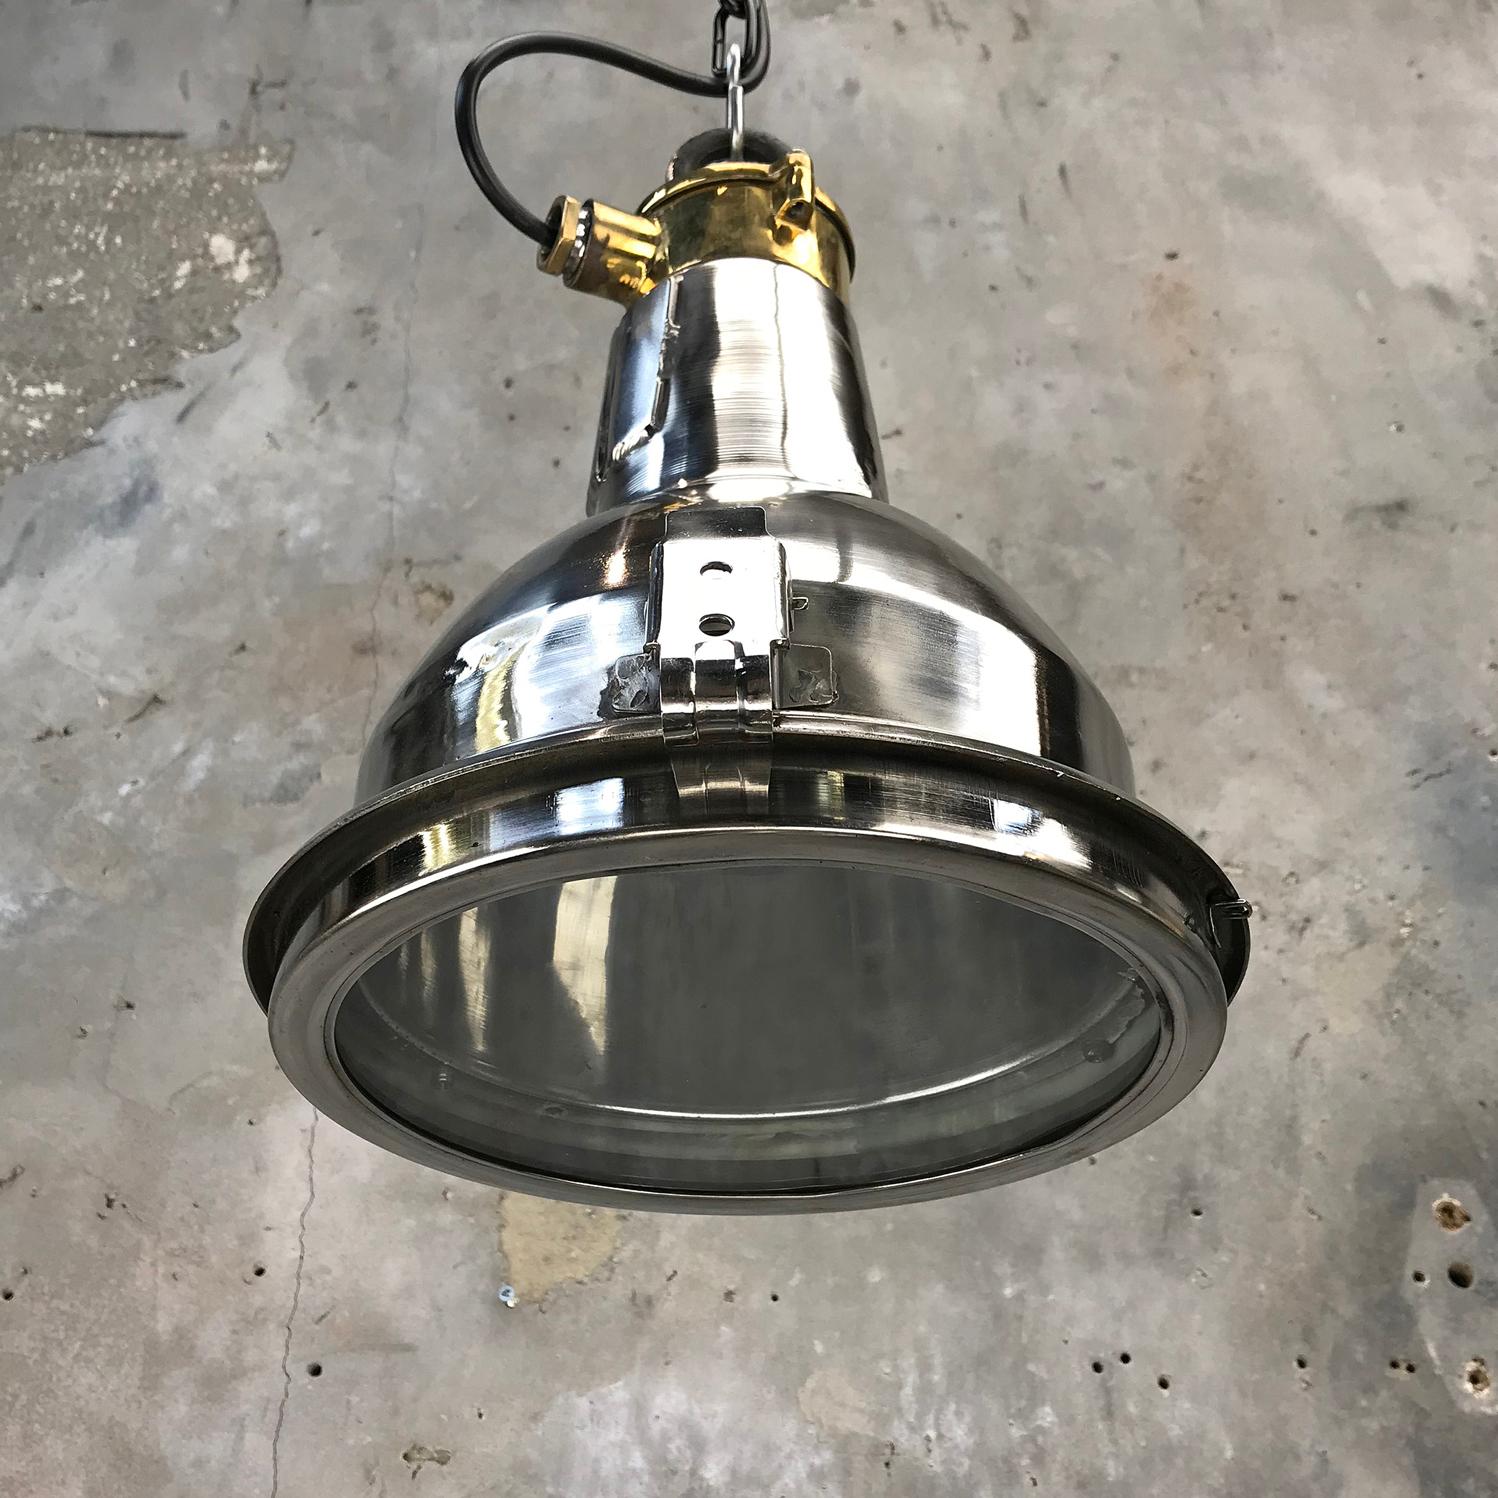 A retro industrial stainless steel and brass ceiling light. 

A great compact pendant ideal for hanging above snooker tables, kitchen islands, breakfast bars or dining tables.

Made by Daeyang, a manufacturer of industrial marine lights, this